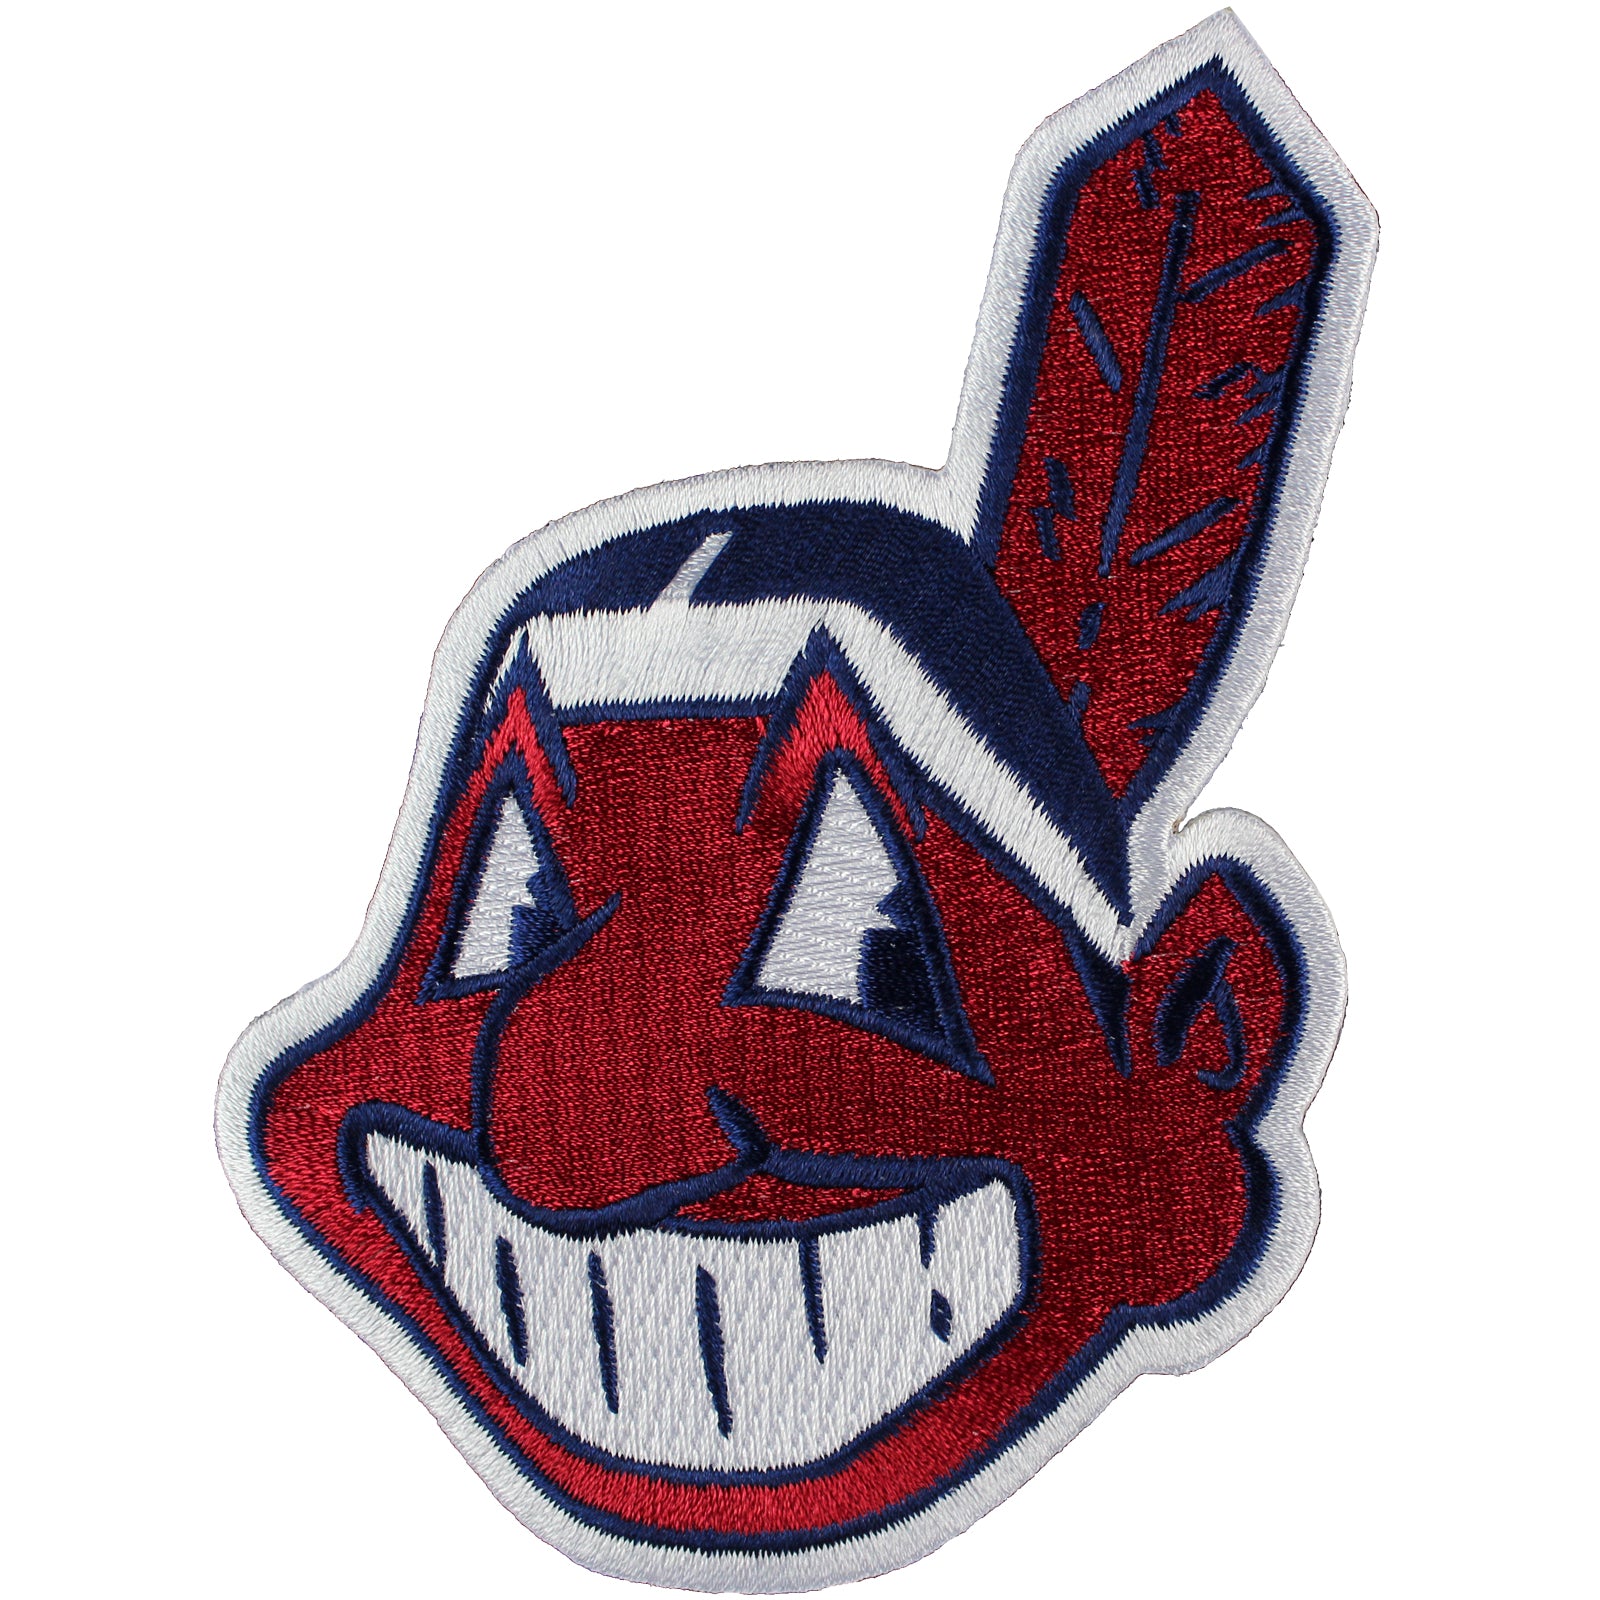 Tattoo uploaded by saclett • 3 of 3 Cleveland Indians Chief Wahoo